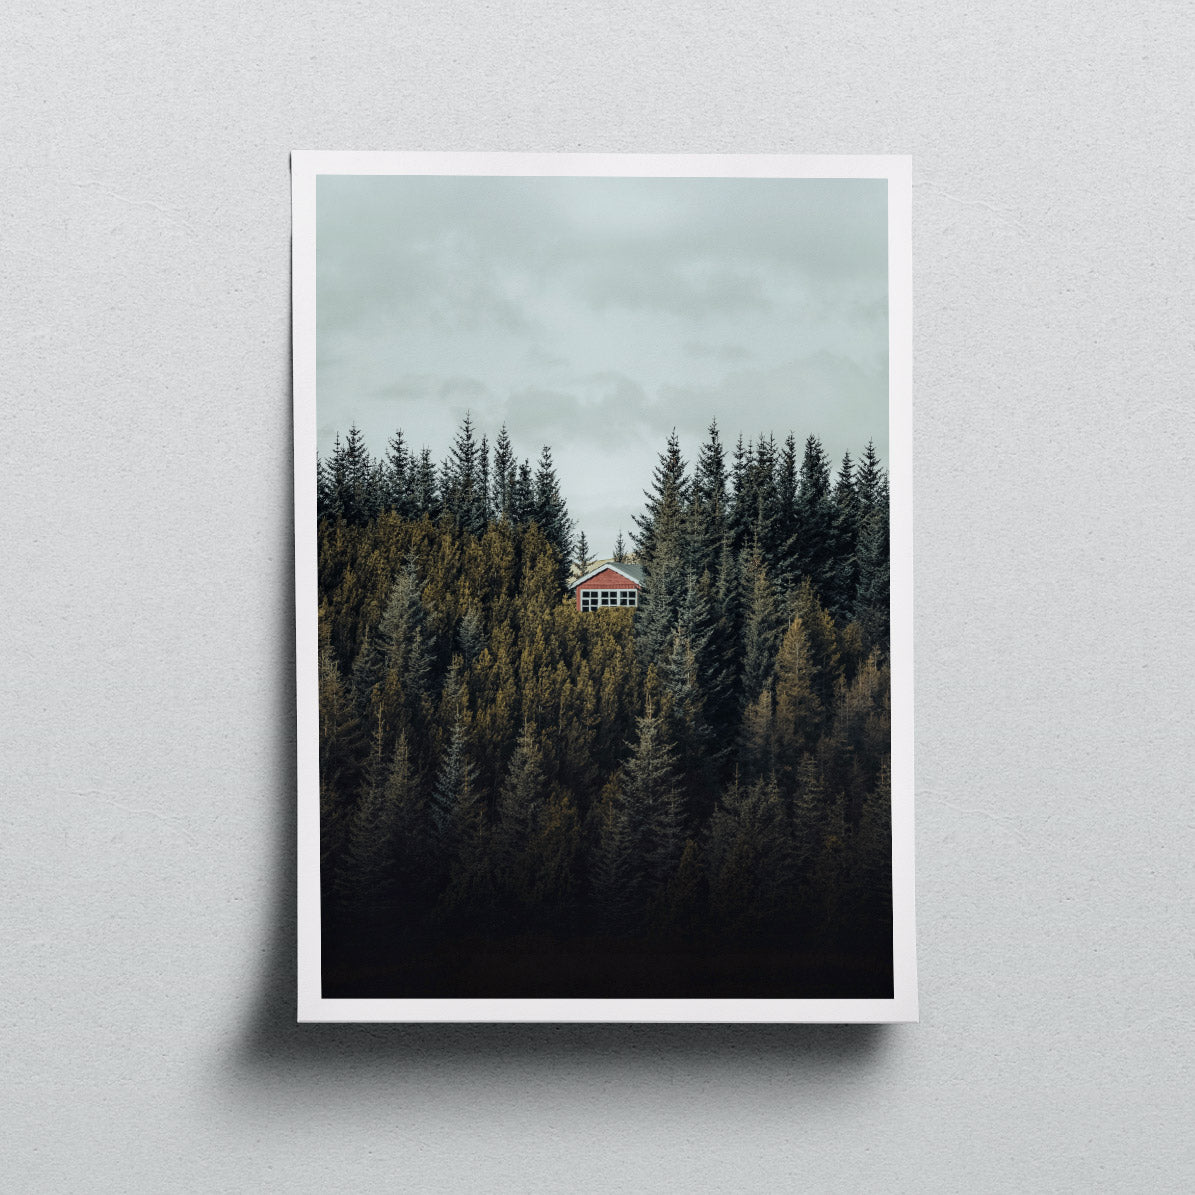 The Lonely Cabin